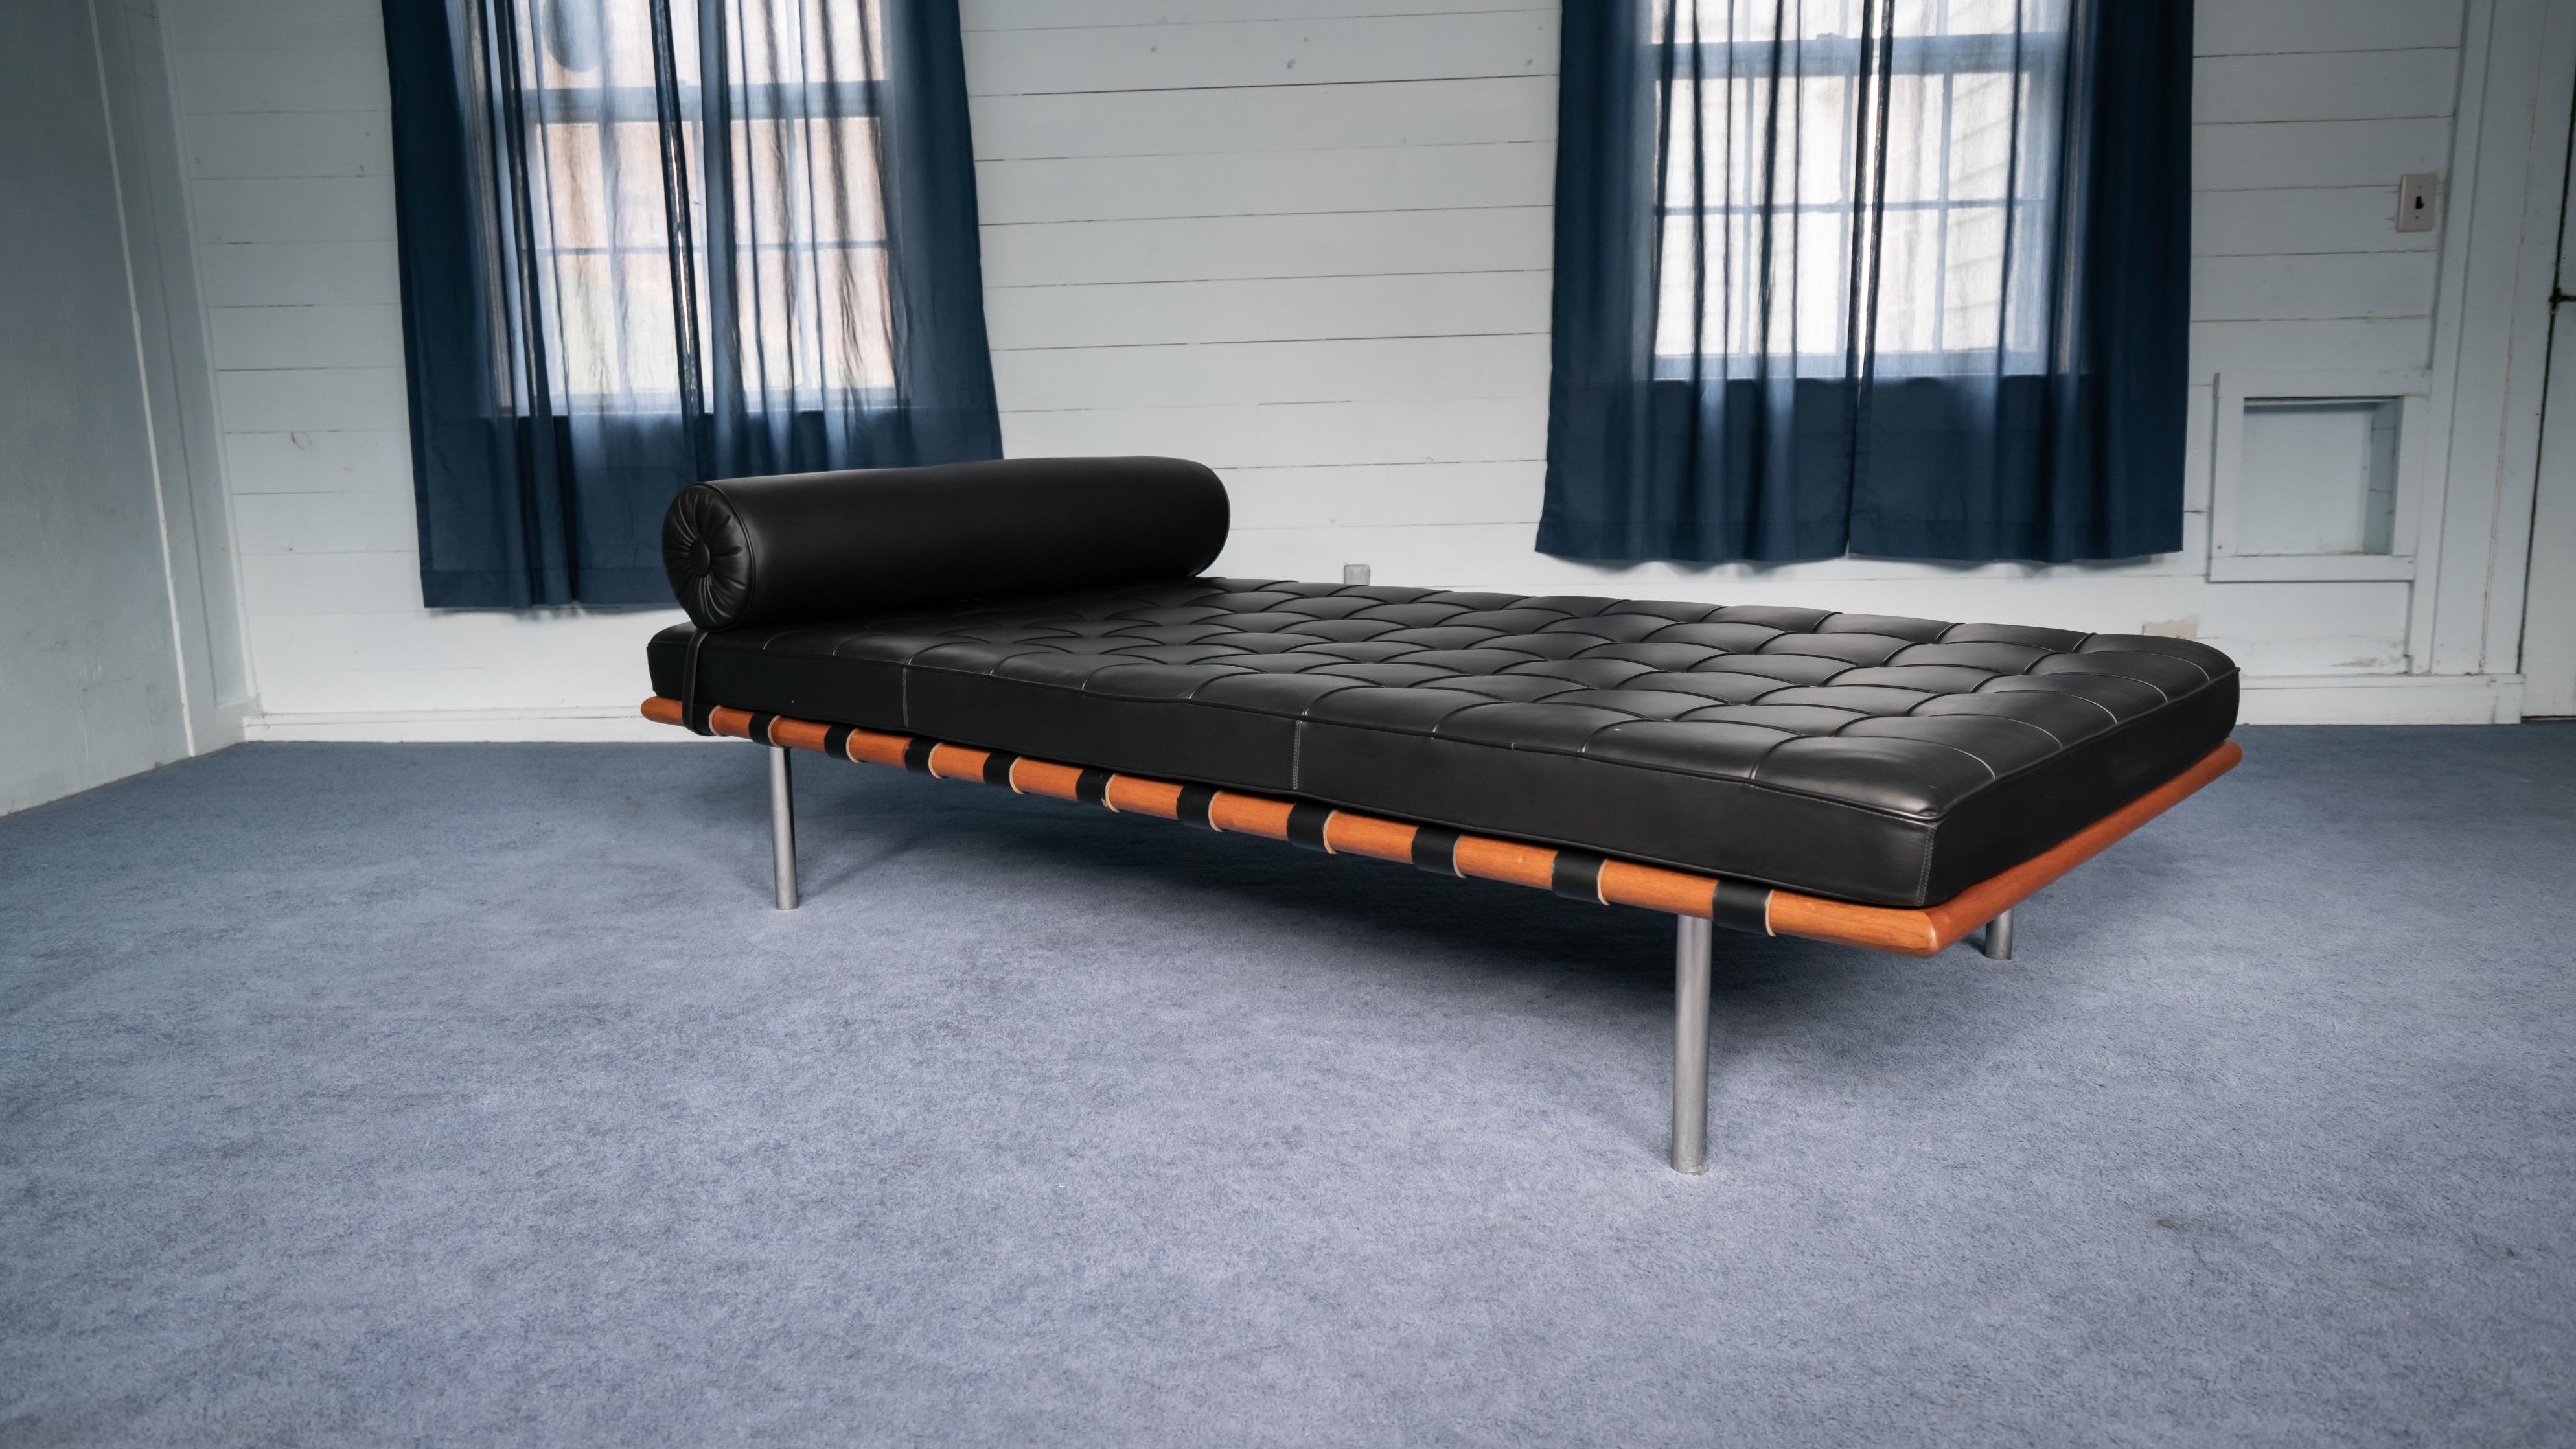 Ludwig Mies van der Rohe Barcelona daybed in black leather, 1970s.
Leather bolster cushion secured with straps and locking snaps and polished stainless steel legs.
Designed by Ludwig Mies vd Rohe in 1930.
Good used condition with signs of wear. One